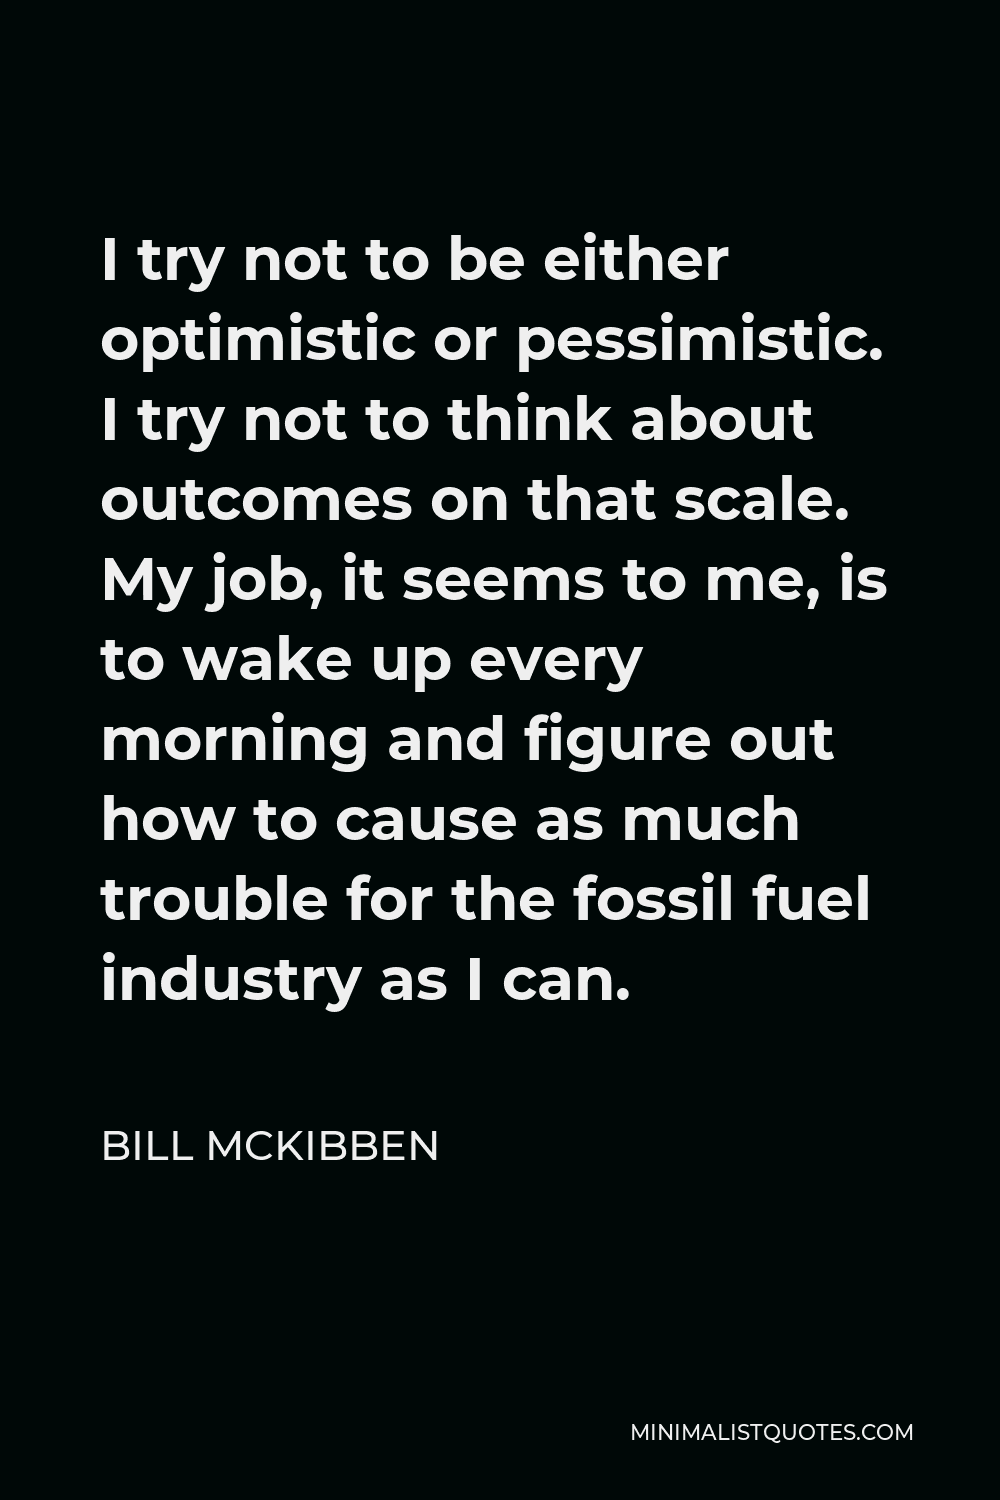 Bill McKibben Quote - I try not to be either optimistic or pessimistic. I try not to think about outcomes on that scale. My job, it seems to me, is to wake up every morning and figure out how to cause as much trouble for the fossil fuel industry as I can.